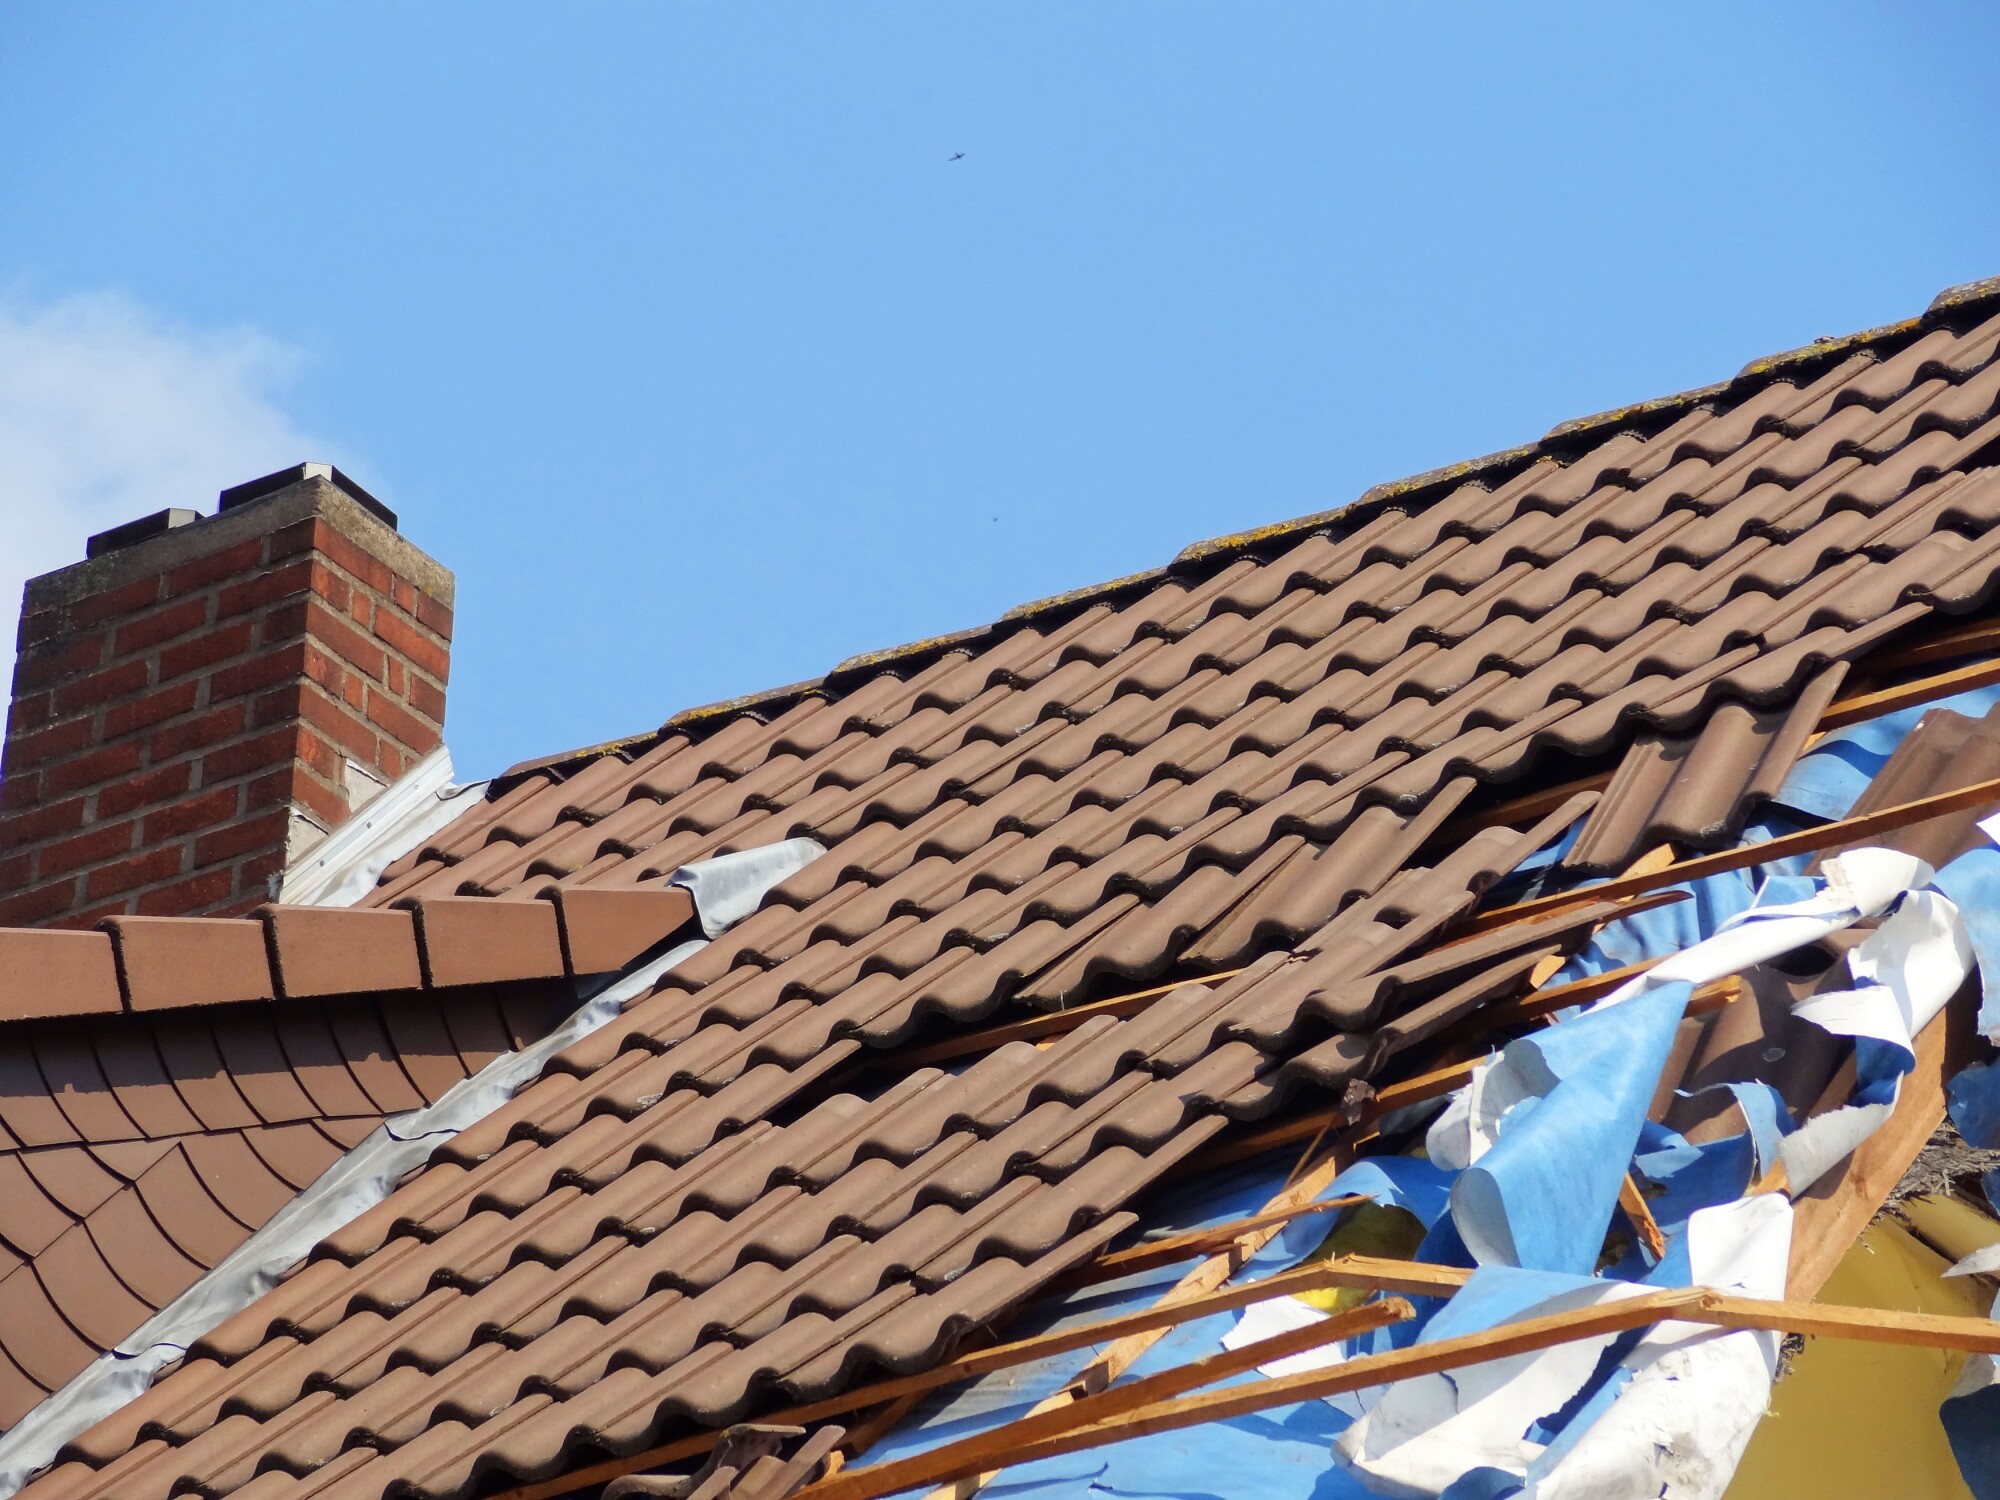 Have strong winds rattled your roof? Need help figuring out what to do next? Read on to learn how to deal with a wind-damaged roof here.